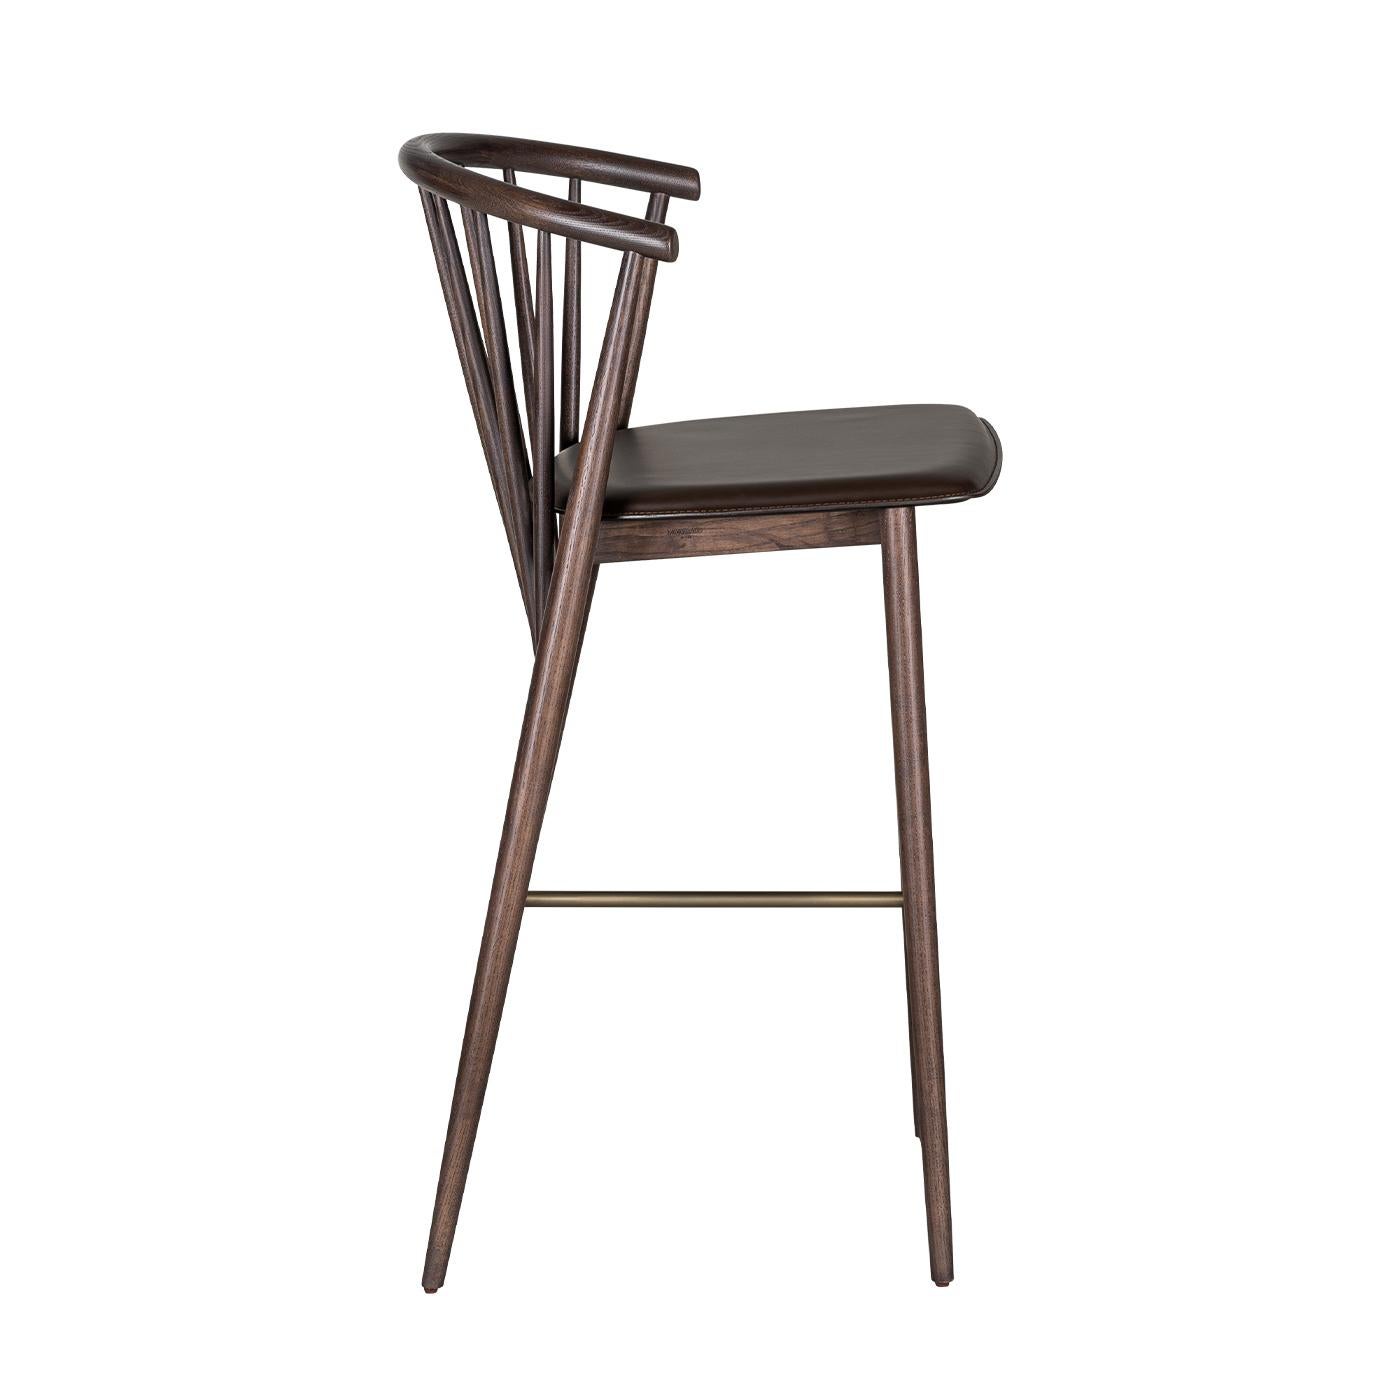 A distinctive bar stool with a charming retro allure. Entirely crafted in elegant brown ash wood and showcasing an iconic Americana rounded spindle back. Enhanced by a sleek metal footrest and matching upholstered seat. 